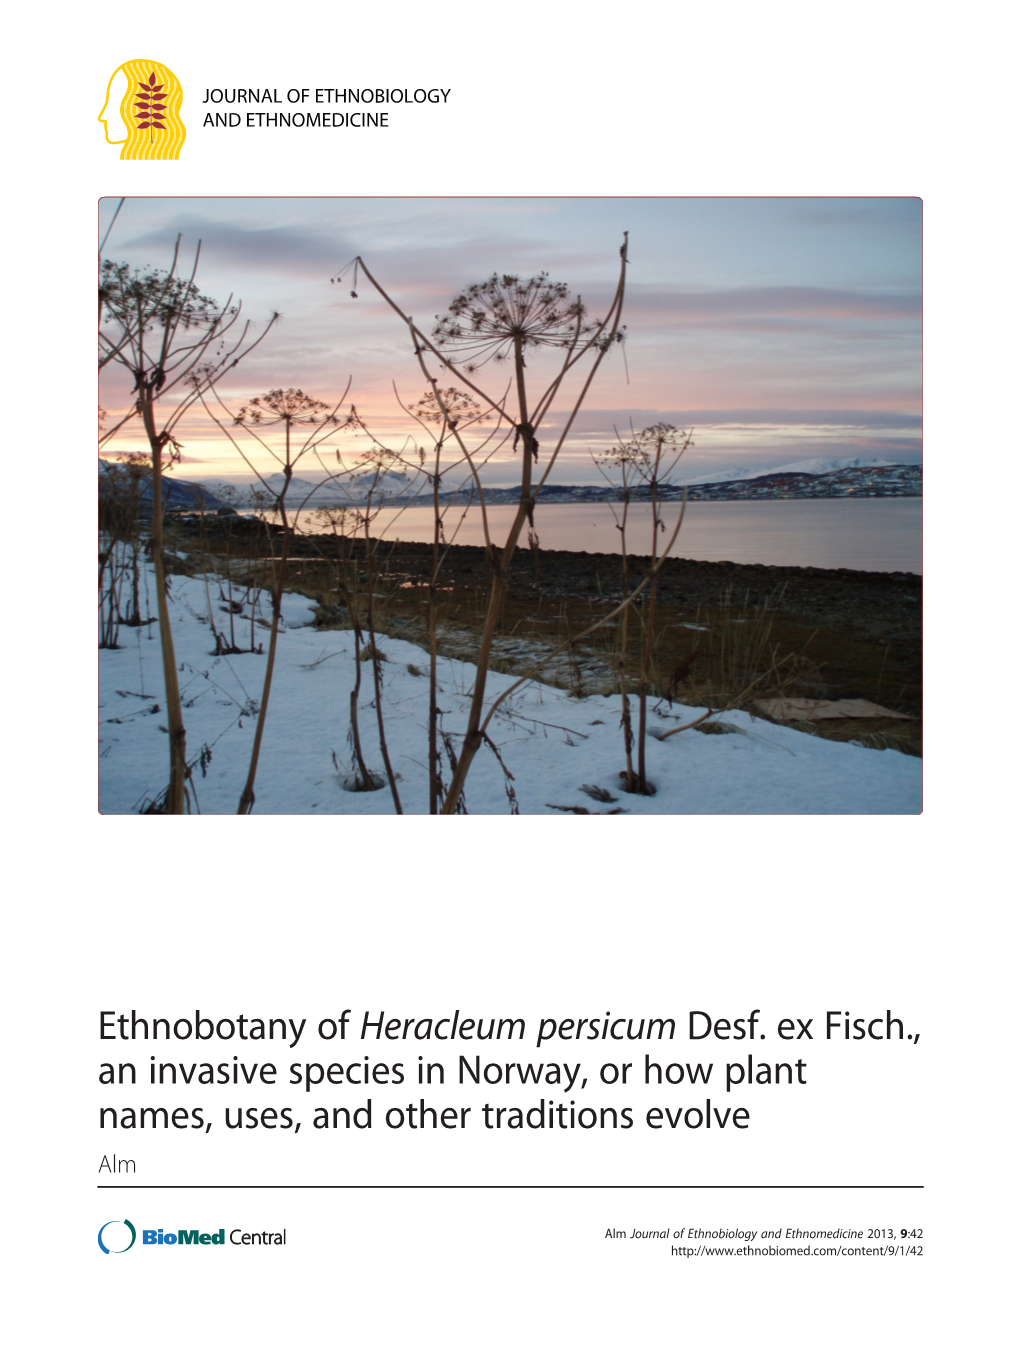 Ethnobotany of Heracleum Persicum Desf. Ex Fisch., an Invasive Species in Norway, Or How Plant Names, Uses, and Other Traditions Evolve Alm